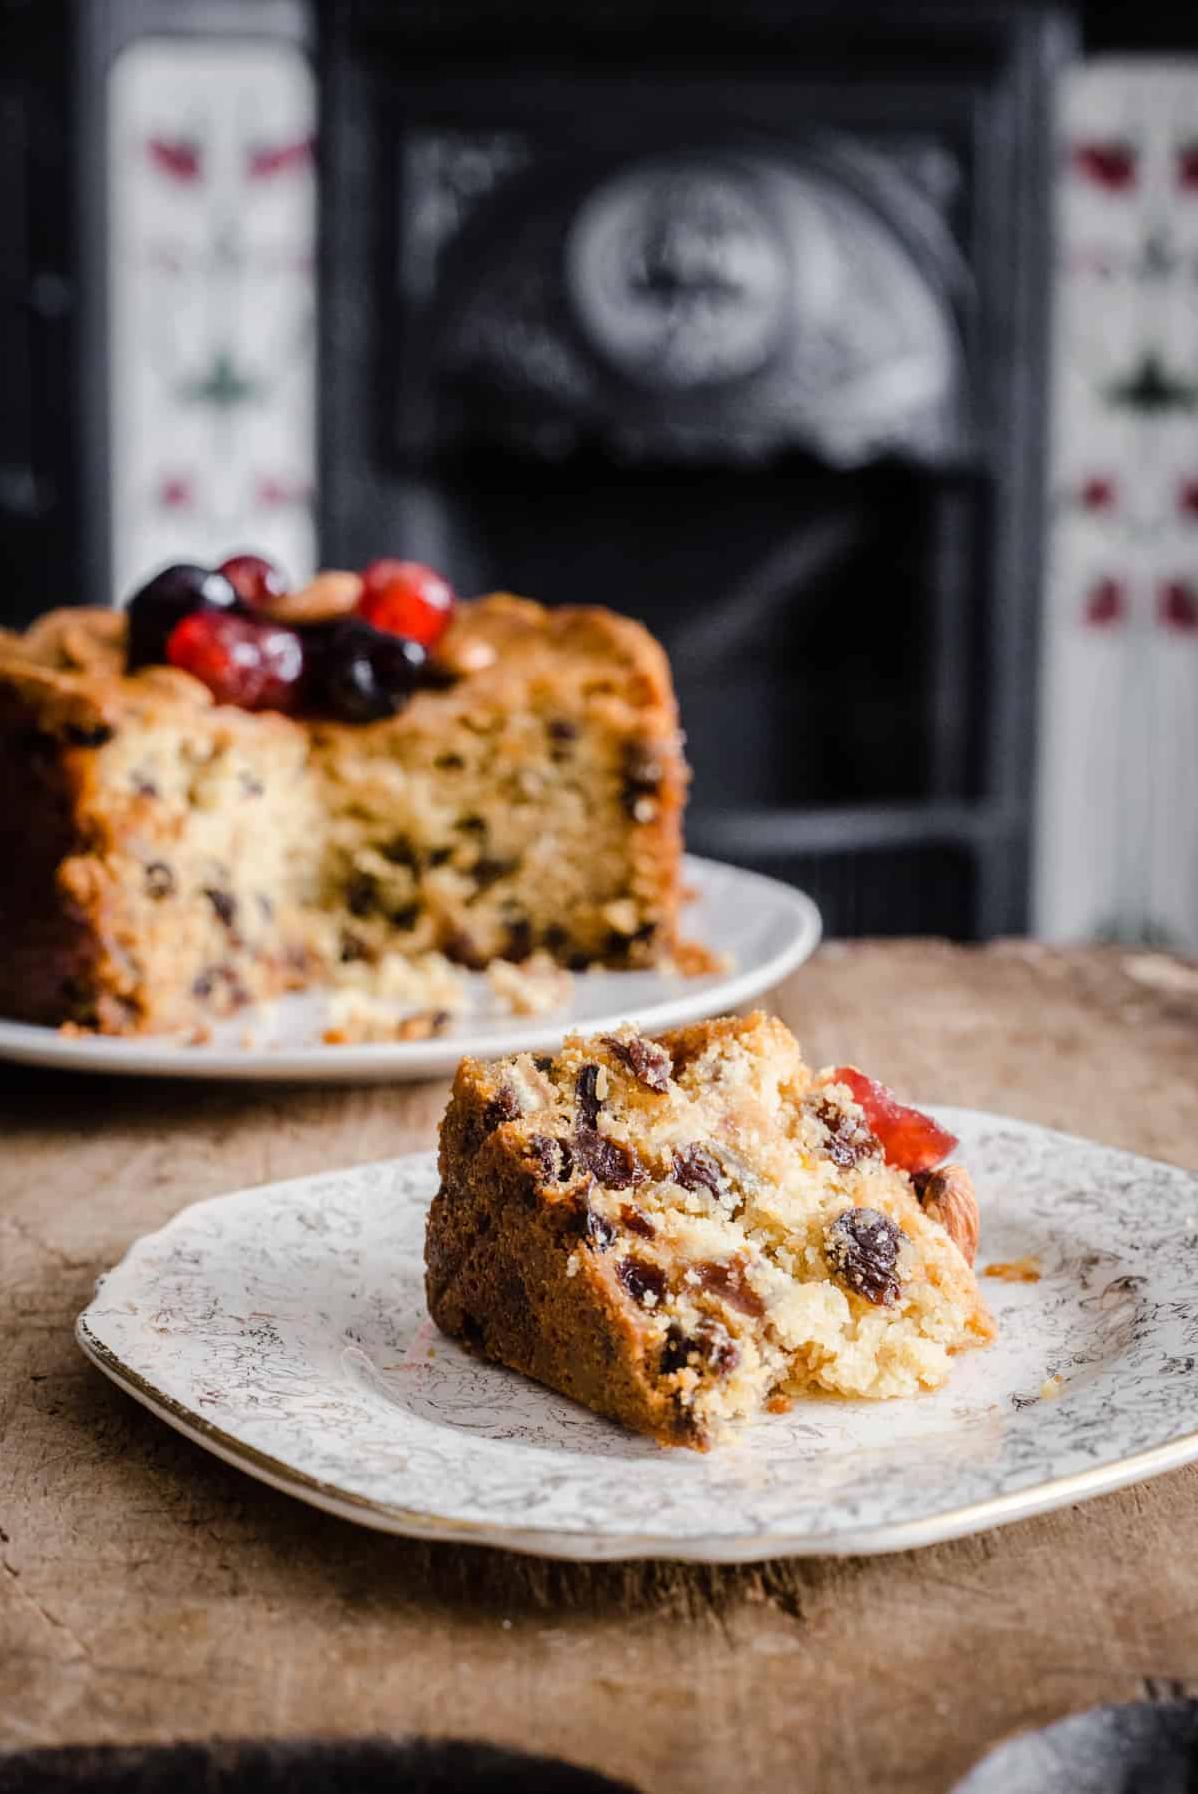  Packed with juicy raisins, crunchy nuts, and sweet apricots, this fruitcake is a texture and flavor sensation